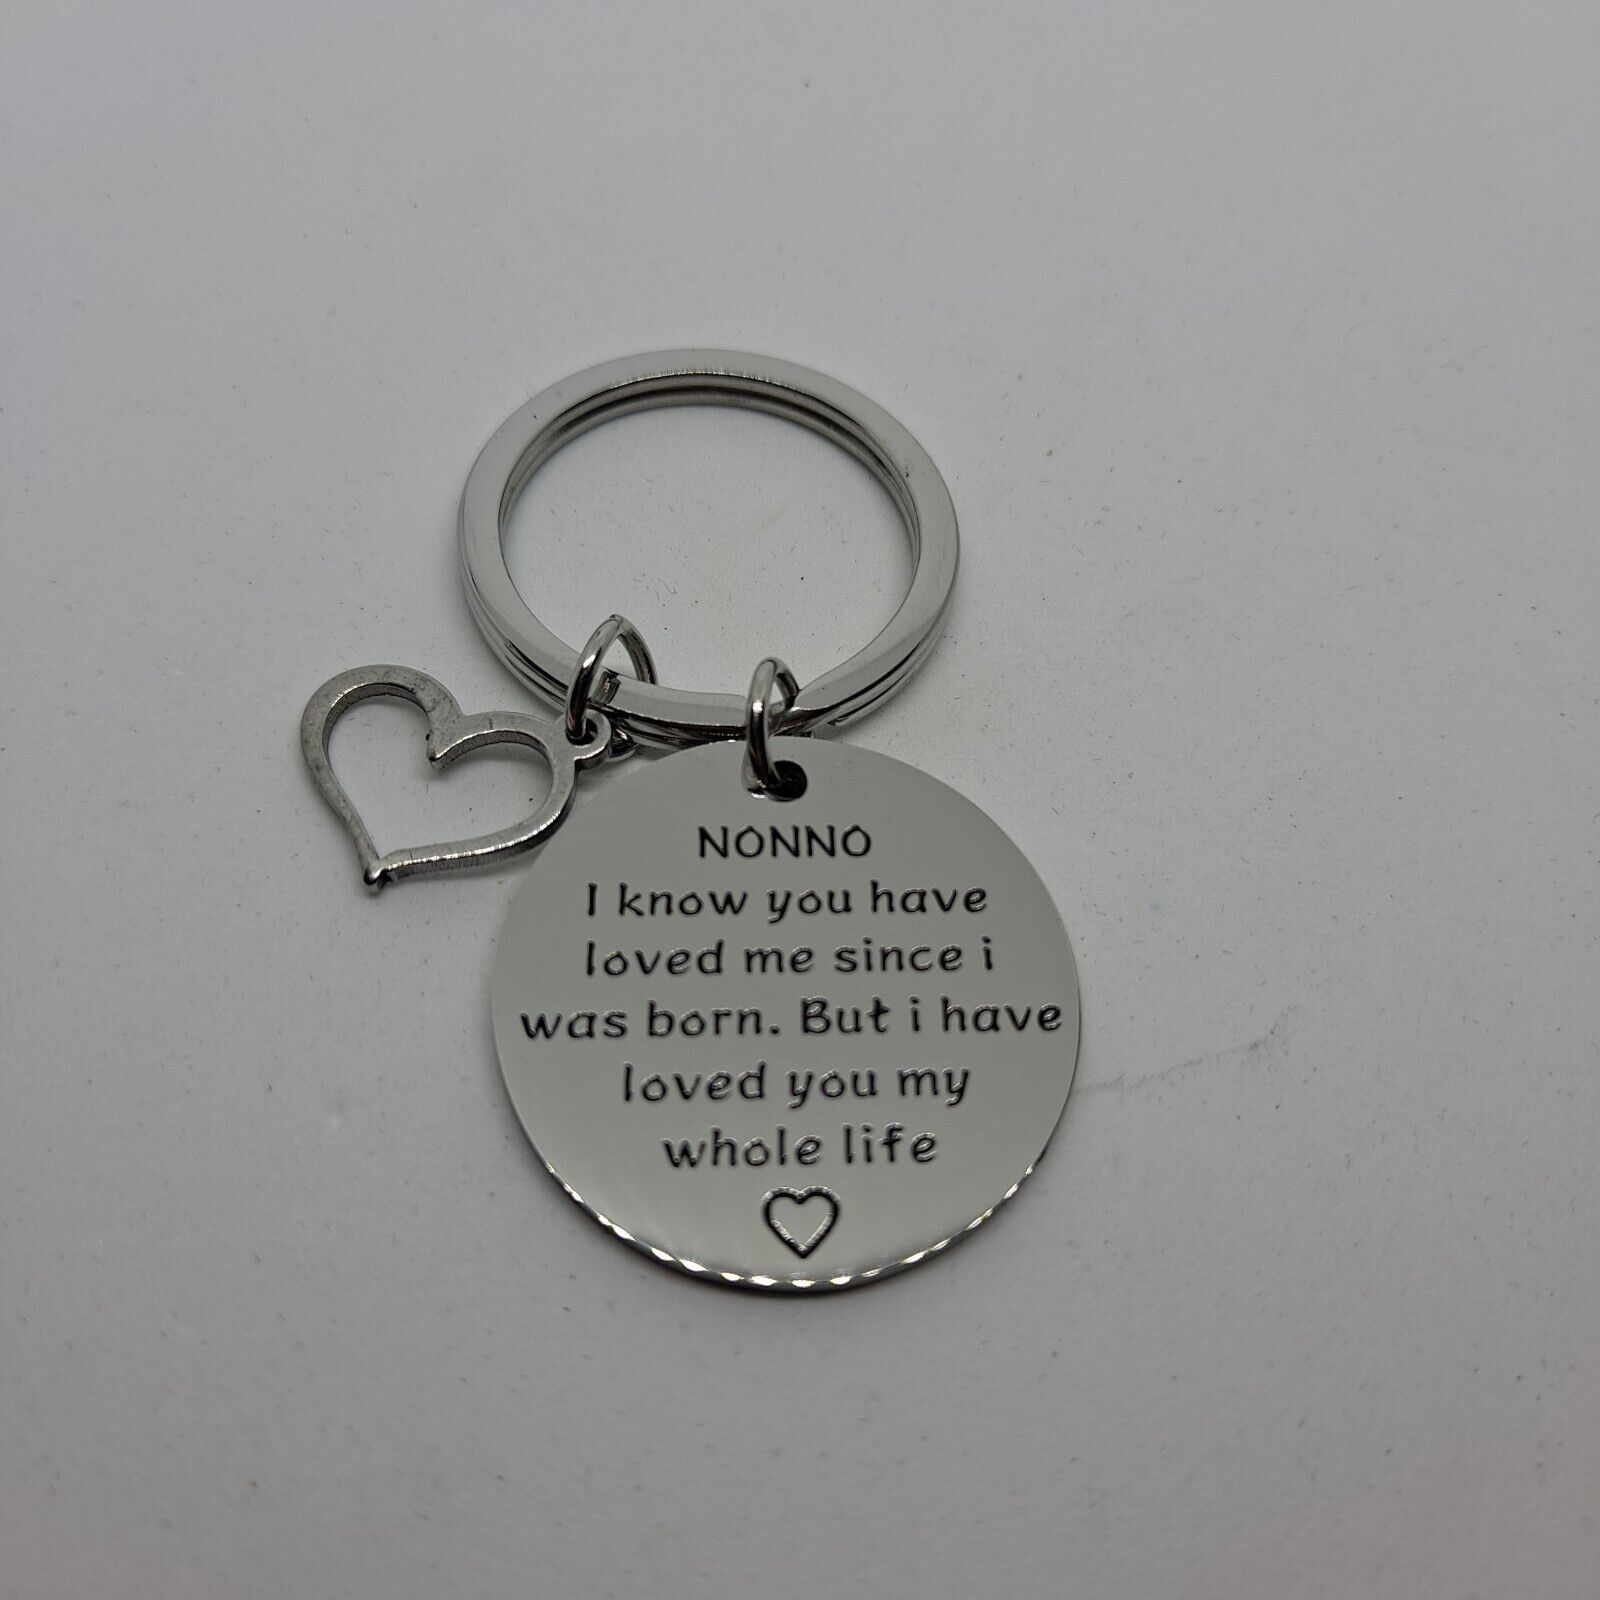 Primary image for Keychain Nonno Heart Love Gift Inspirational Key Ring Silver